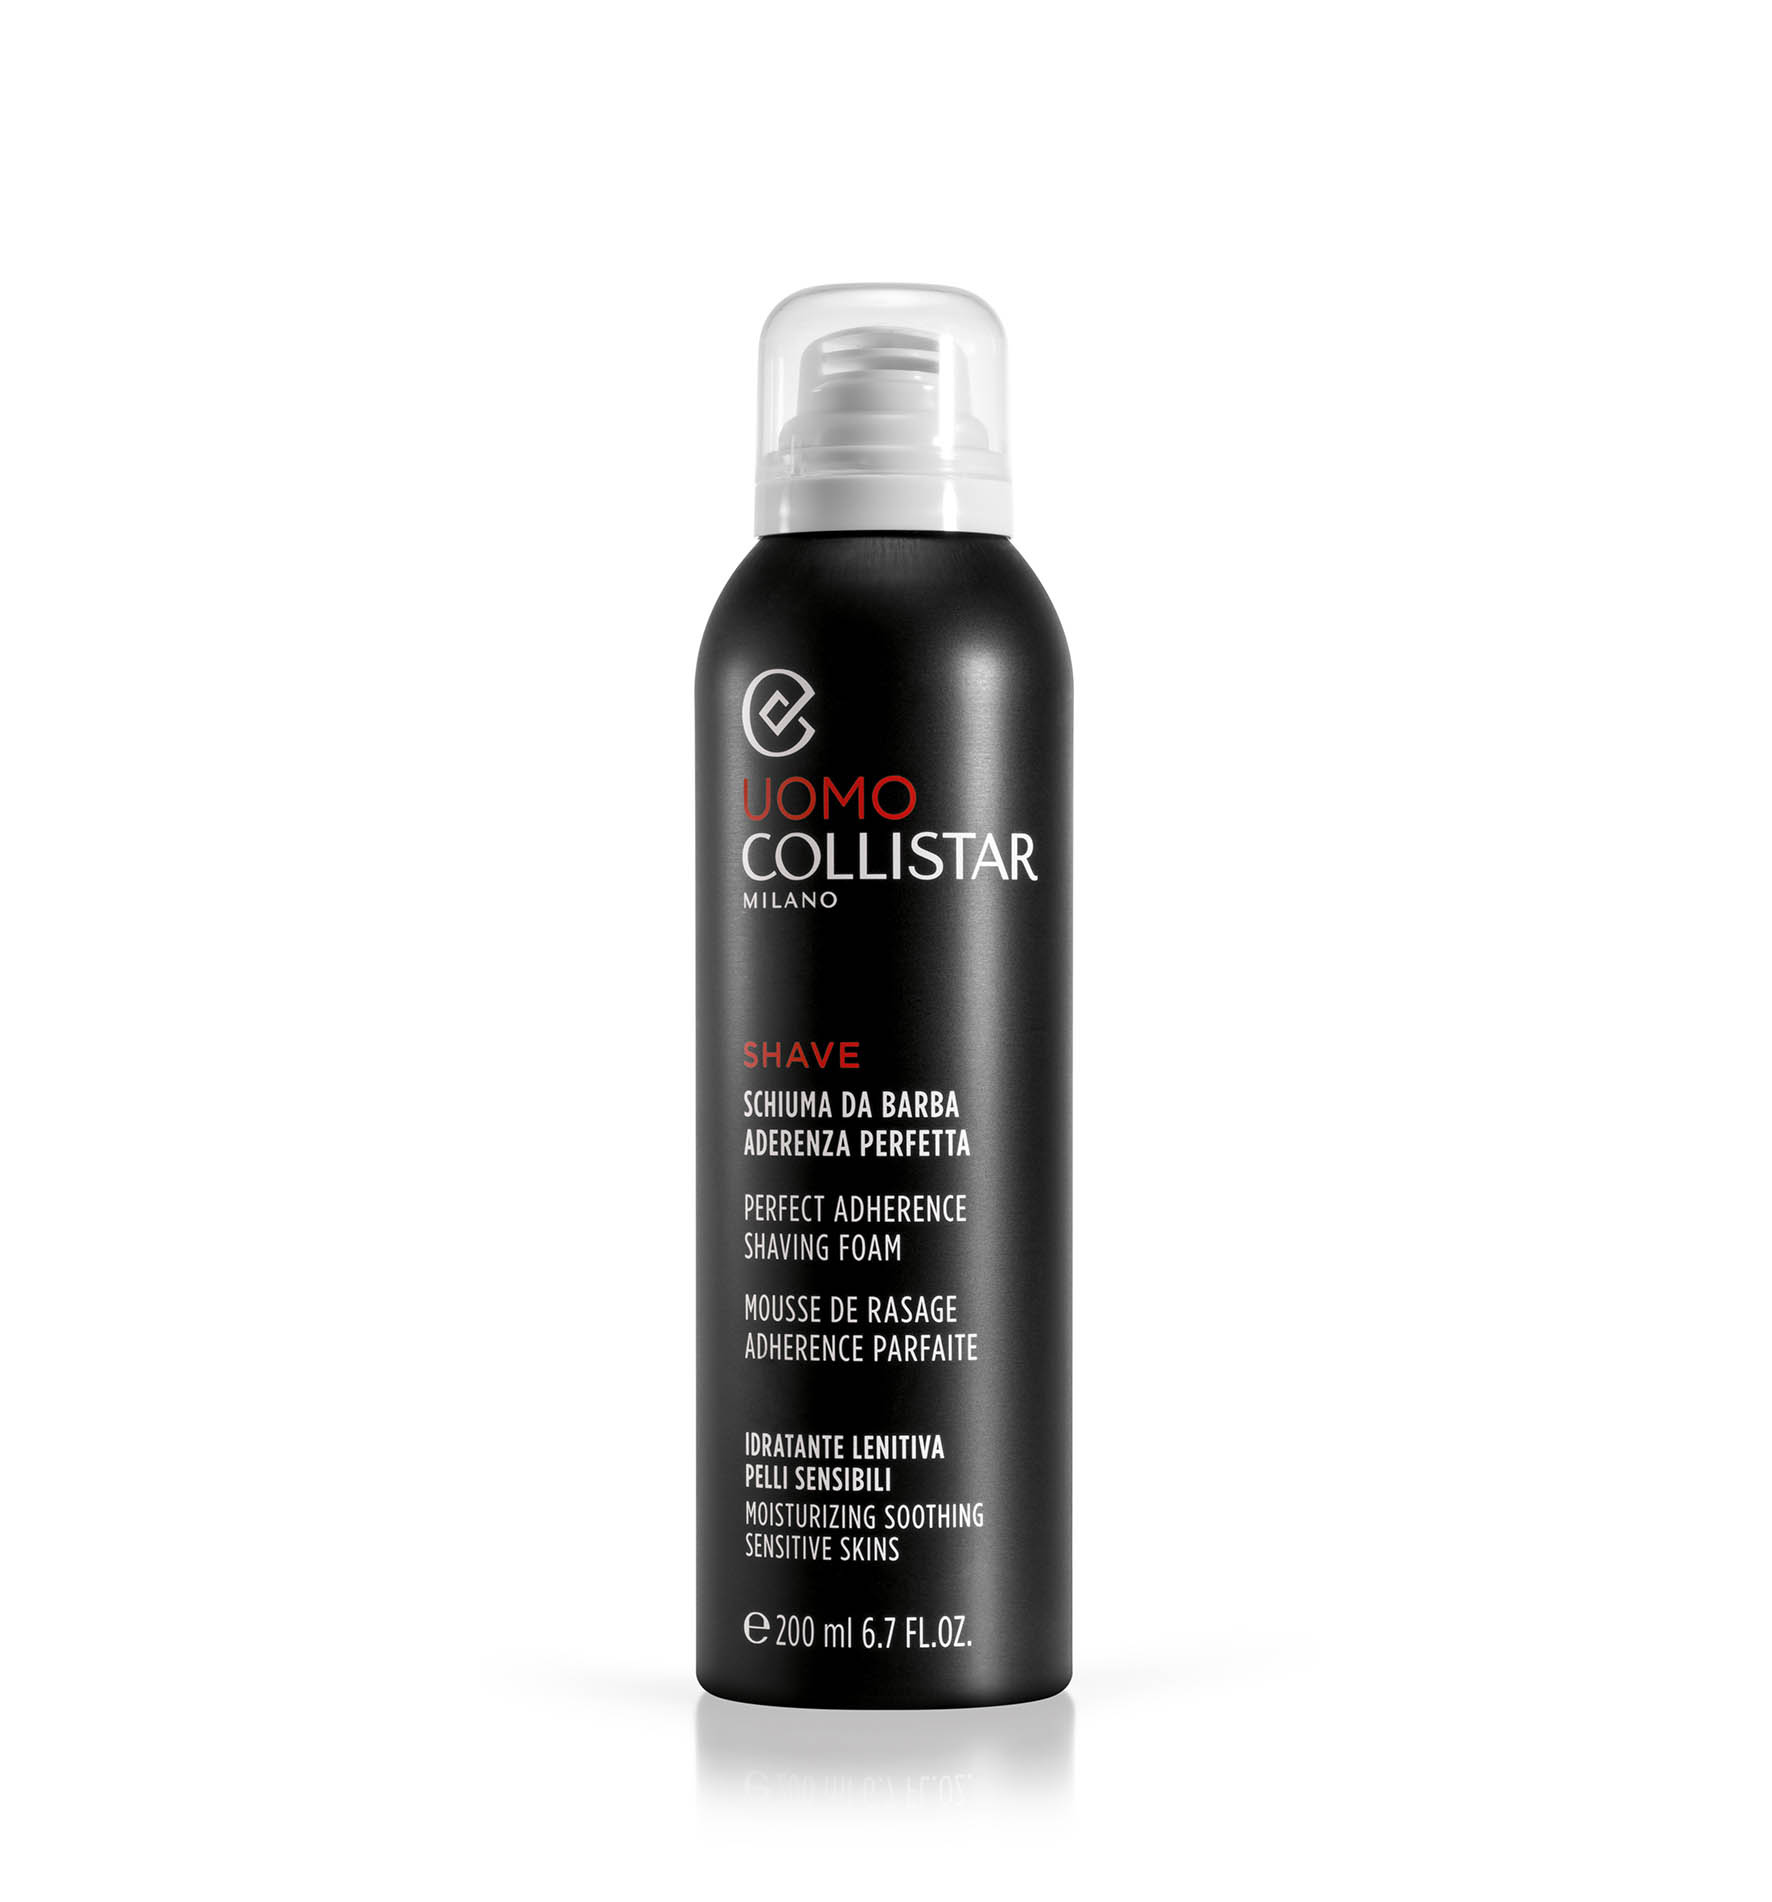 PERFECT ADHERENCE SHAVING FOAM MOISTURIZING SOOTHING SENSITIVE SKIN - NEW | Collistar - Shop Online Ufficiale